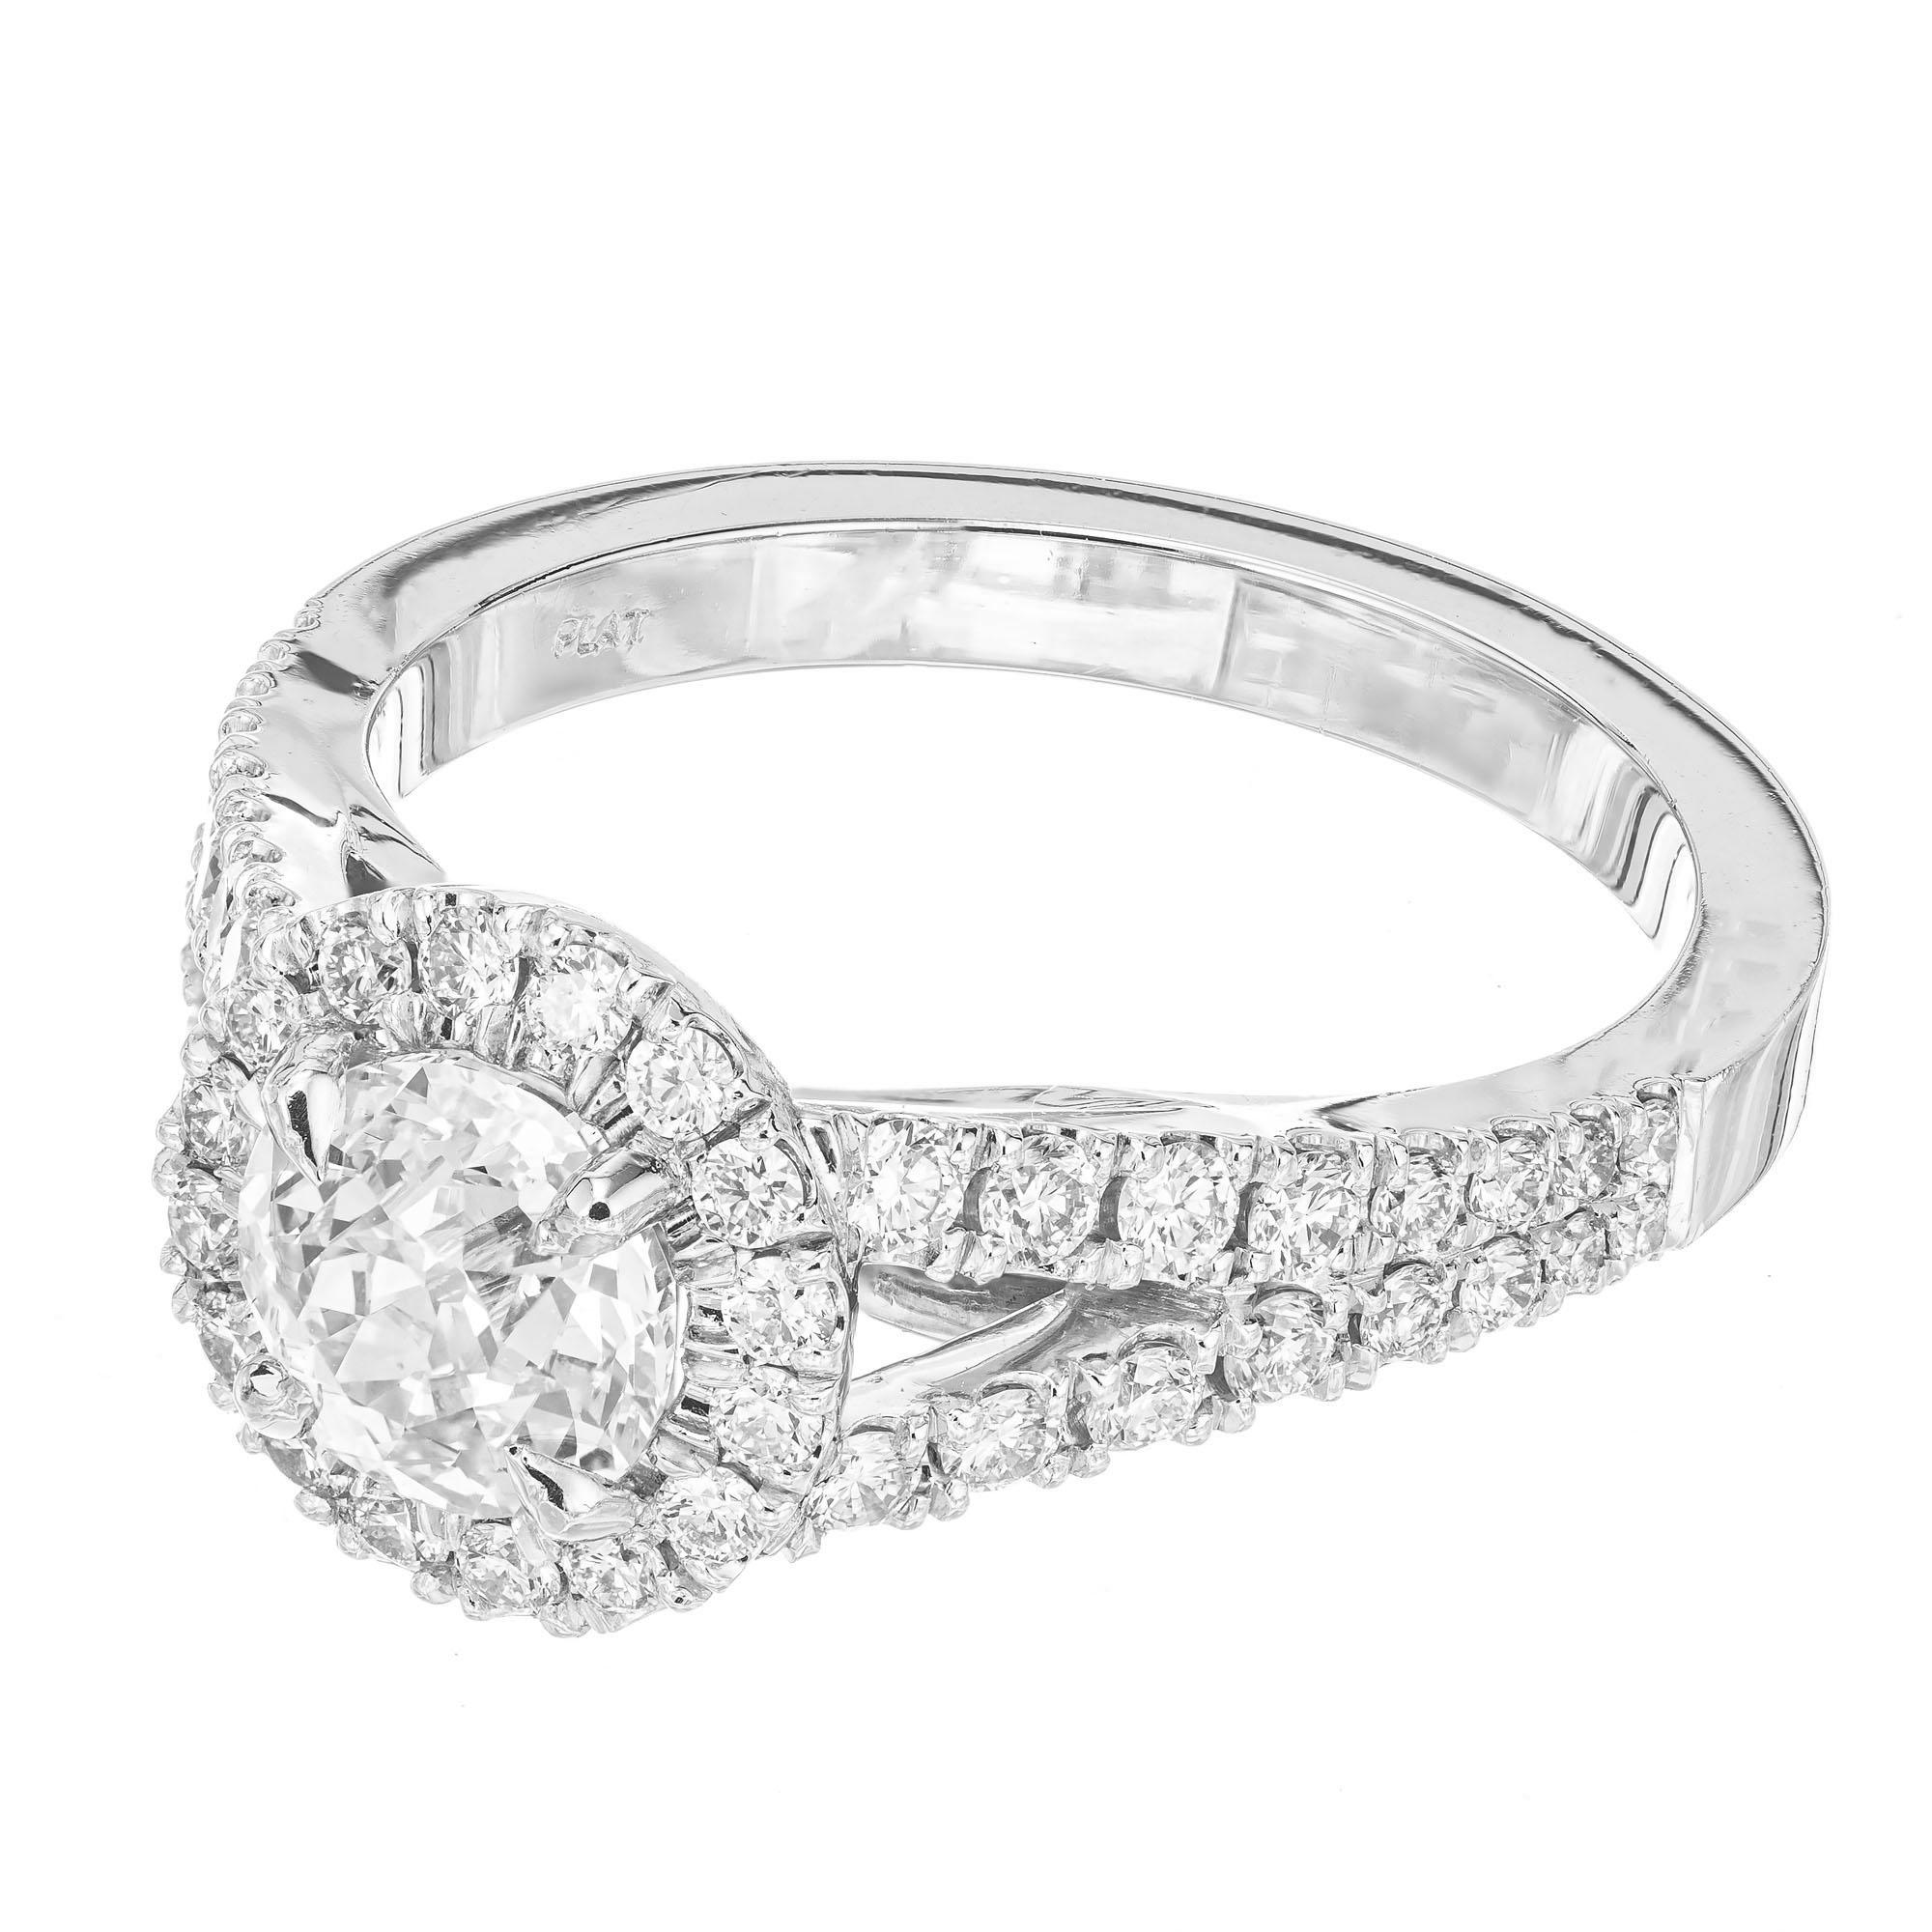 Peter Suchy 1.00 Carat GIA Cert Diamond Platinum Halo Engagement Ring In Excellent Condition For Sale In Stamford, CT